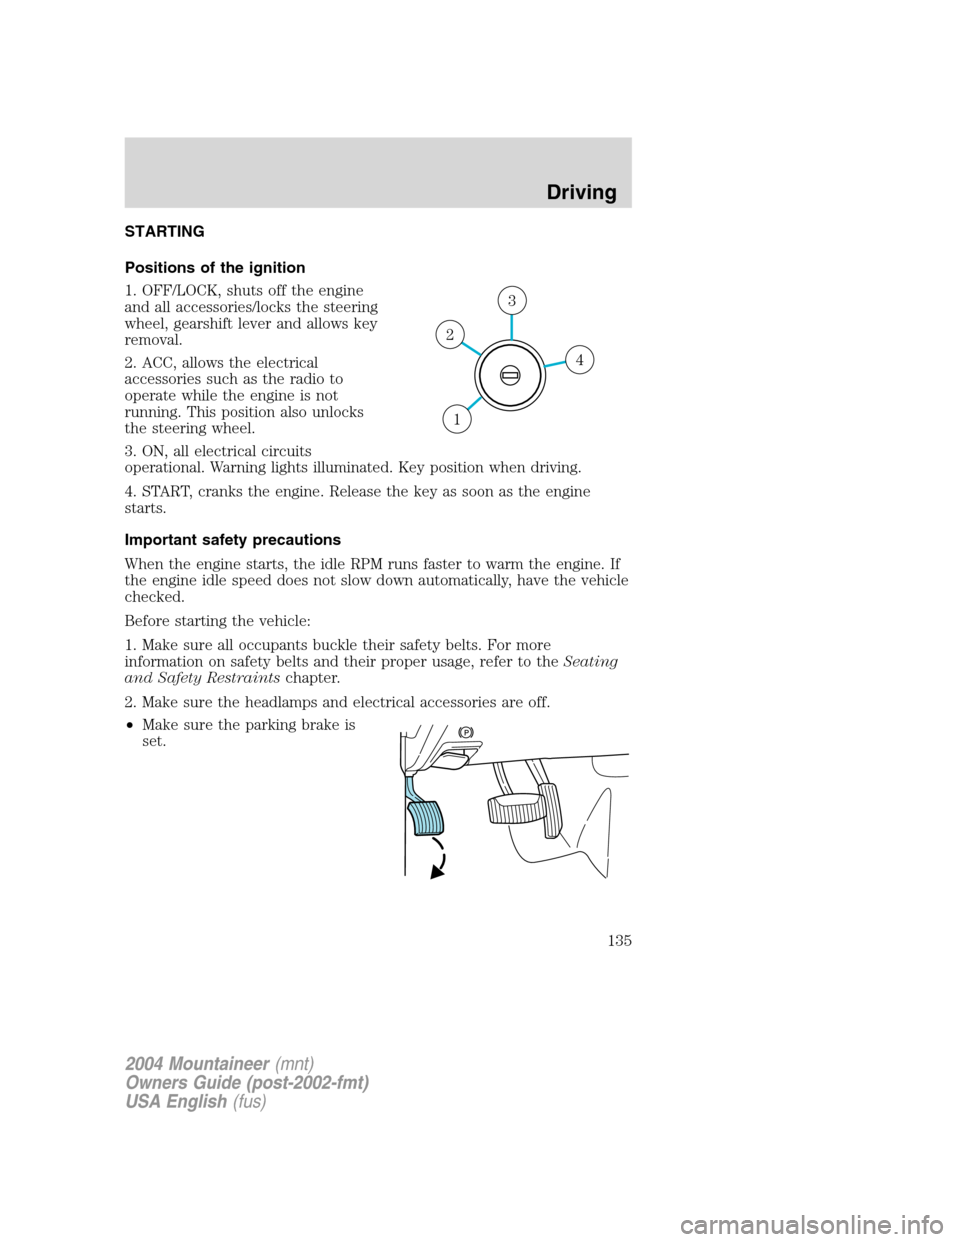 Mercury Mountaineer 2004  Owners Manuals STARTING
Positions of the ignition
1. OFF/LOCK, shuts off the engine
and all accessories/locks the steering
wheel, gearshift lever and allows key
removal.
2. ACC, allows the electrical
accessories suc